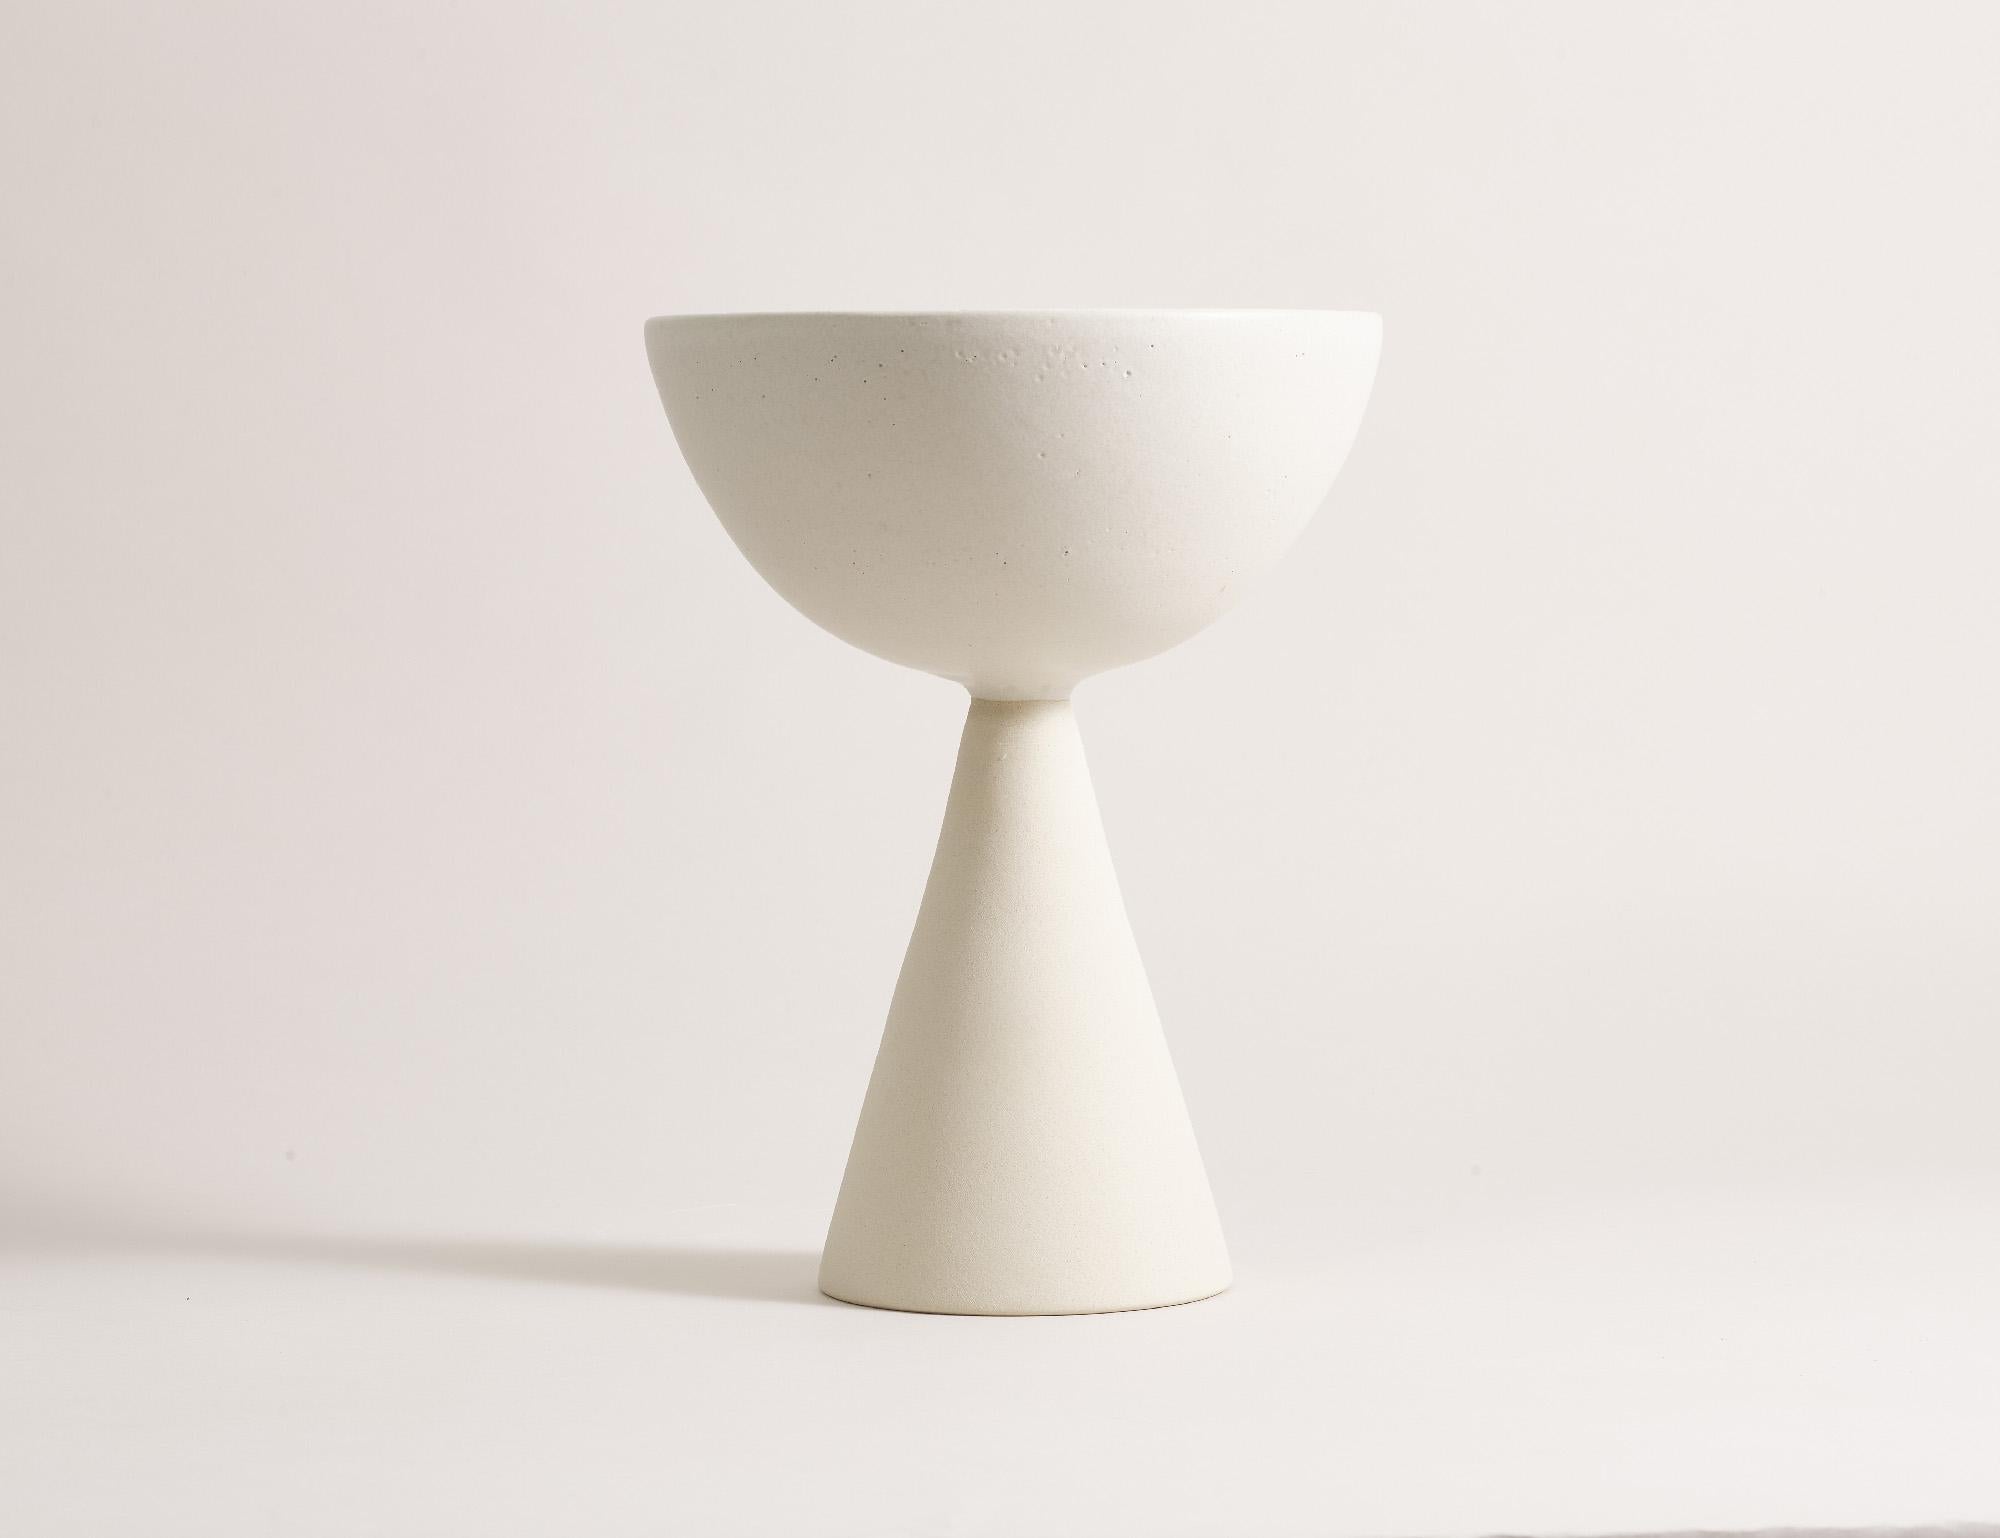 Handcrafted 014 Coupe by Lovebuch
Dimensions: Ø 21 x H 26 cm
Materials: Sandstone, handcrafted piece

Katia works with wood and clay, these raw, powerfully expressive materials are shaped to create a poetry of objects that inhabit our daily